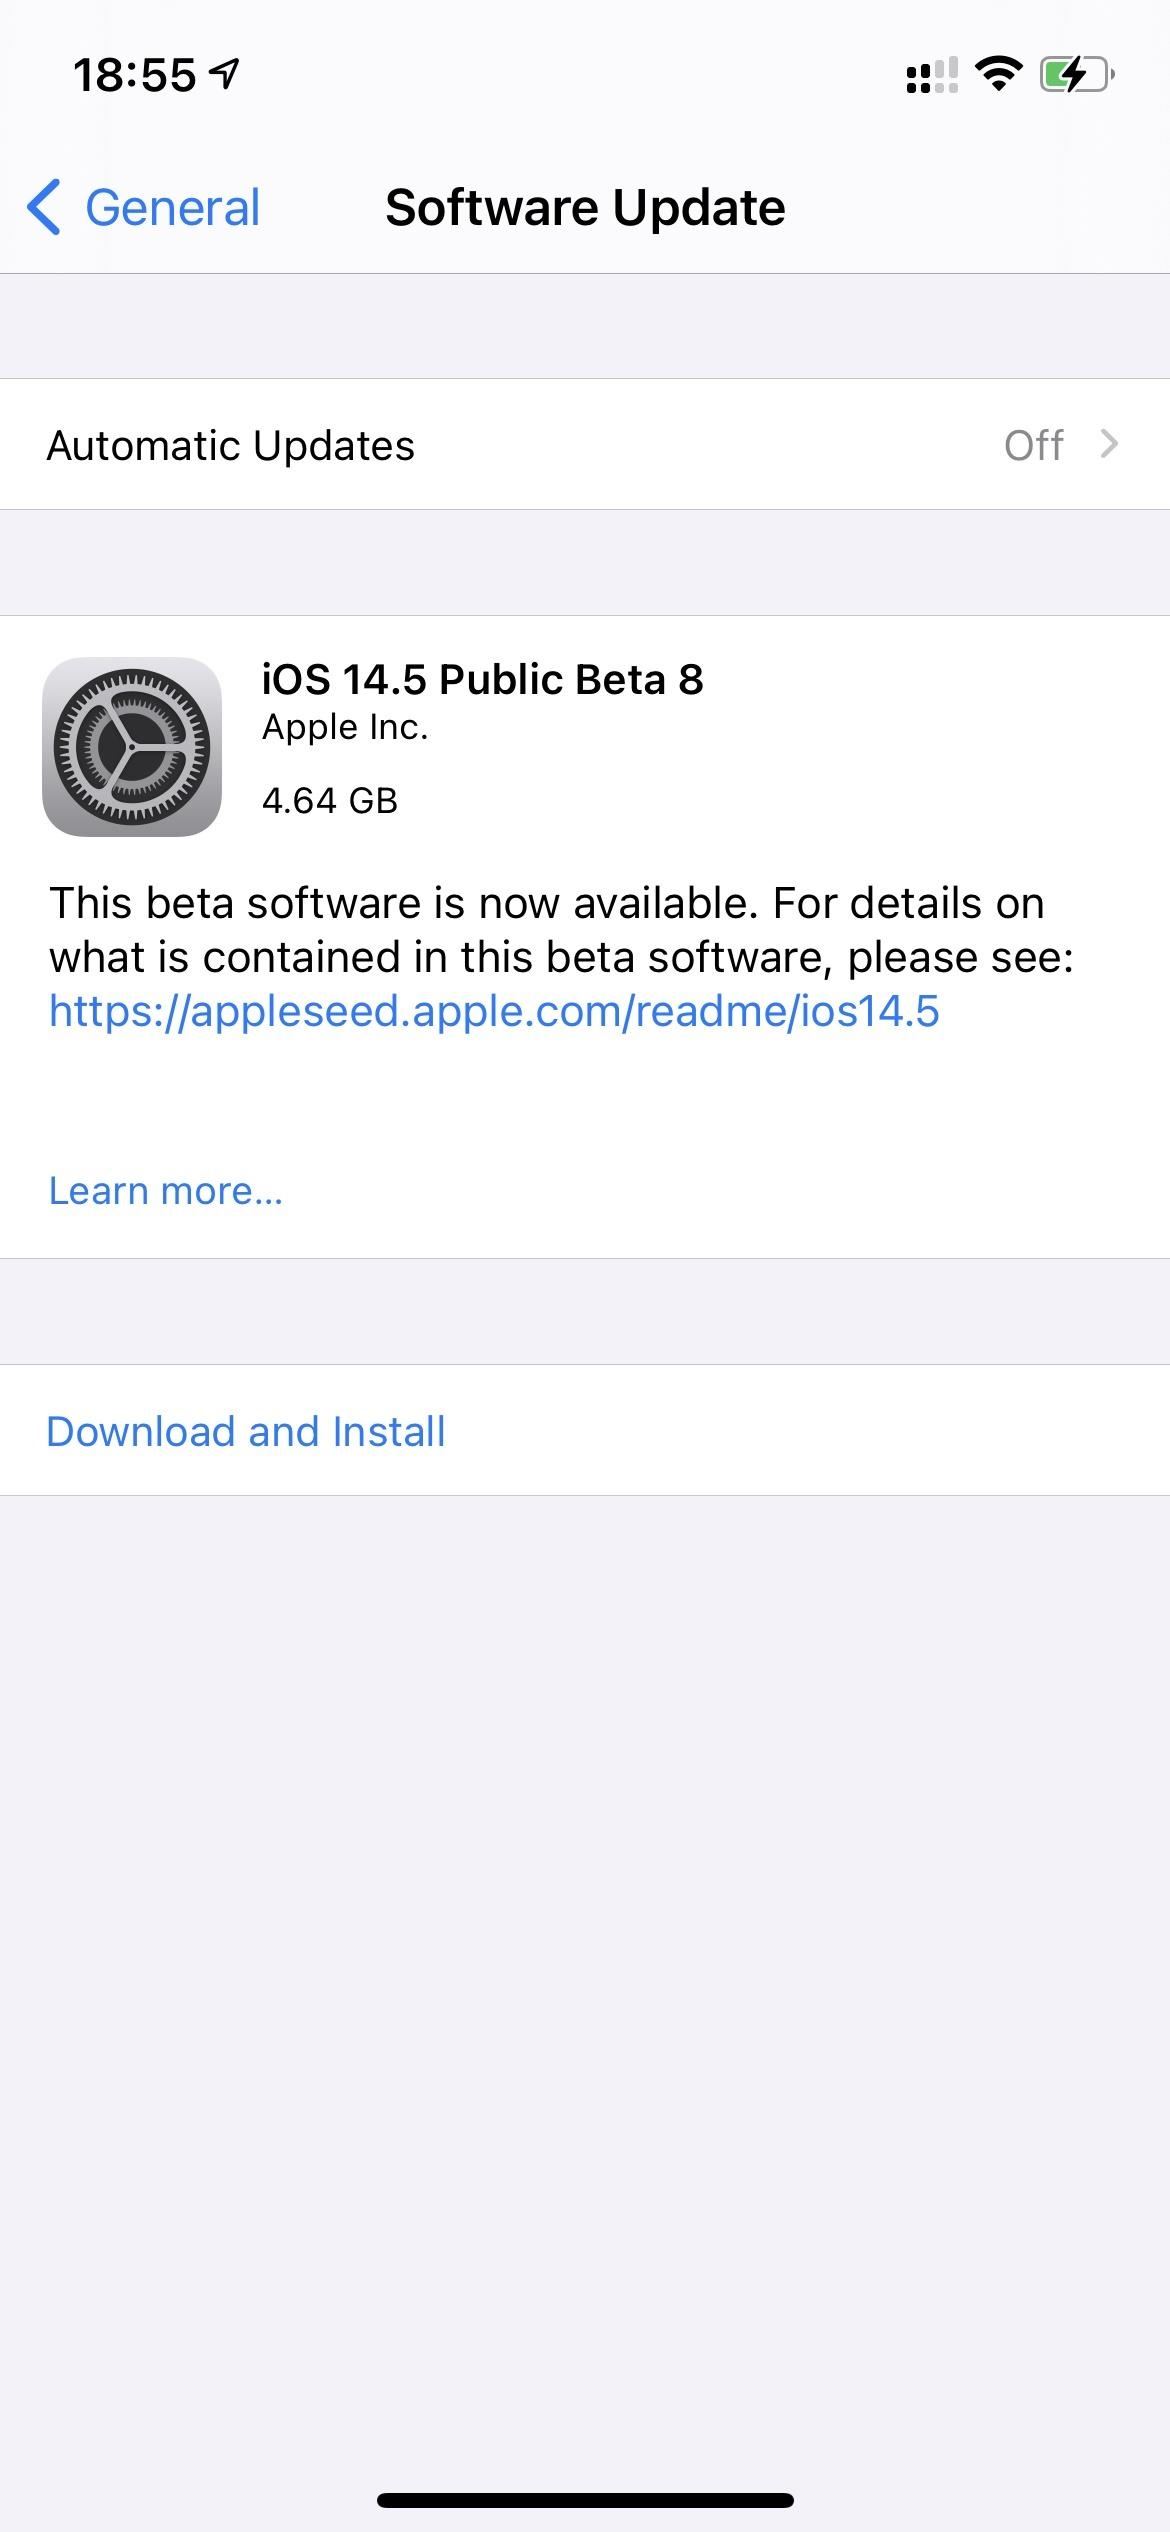 Apple Releases iOS 14.5 Public Beta 8, Features Under-the-Hood Changes